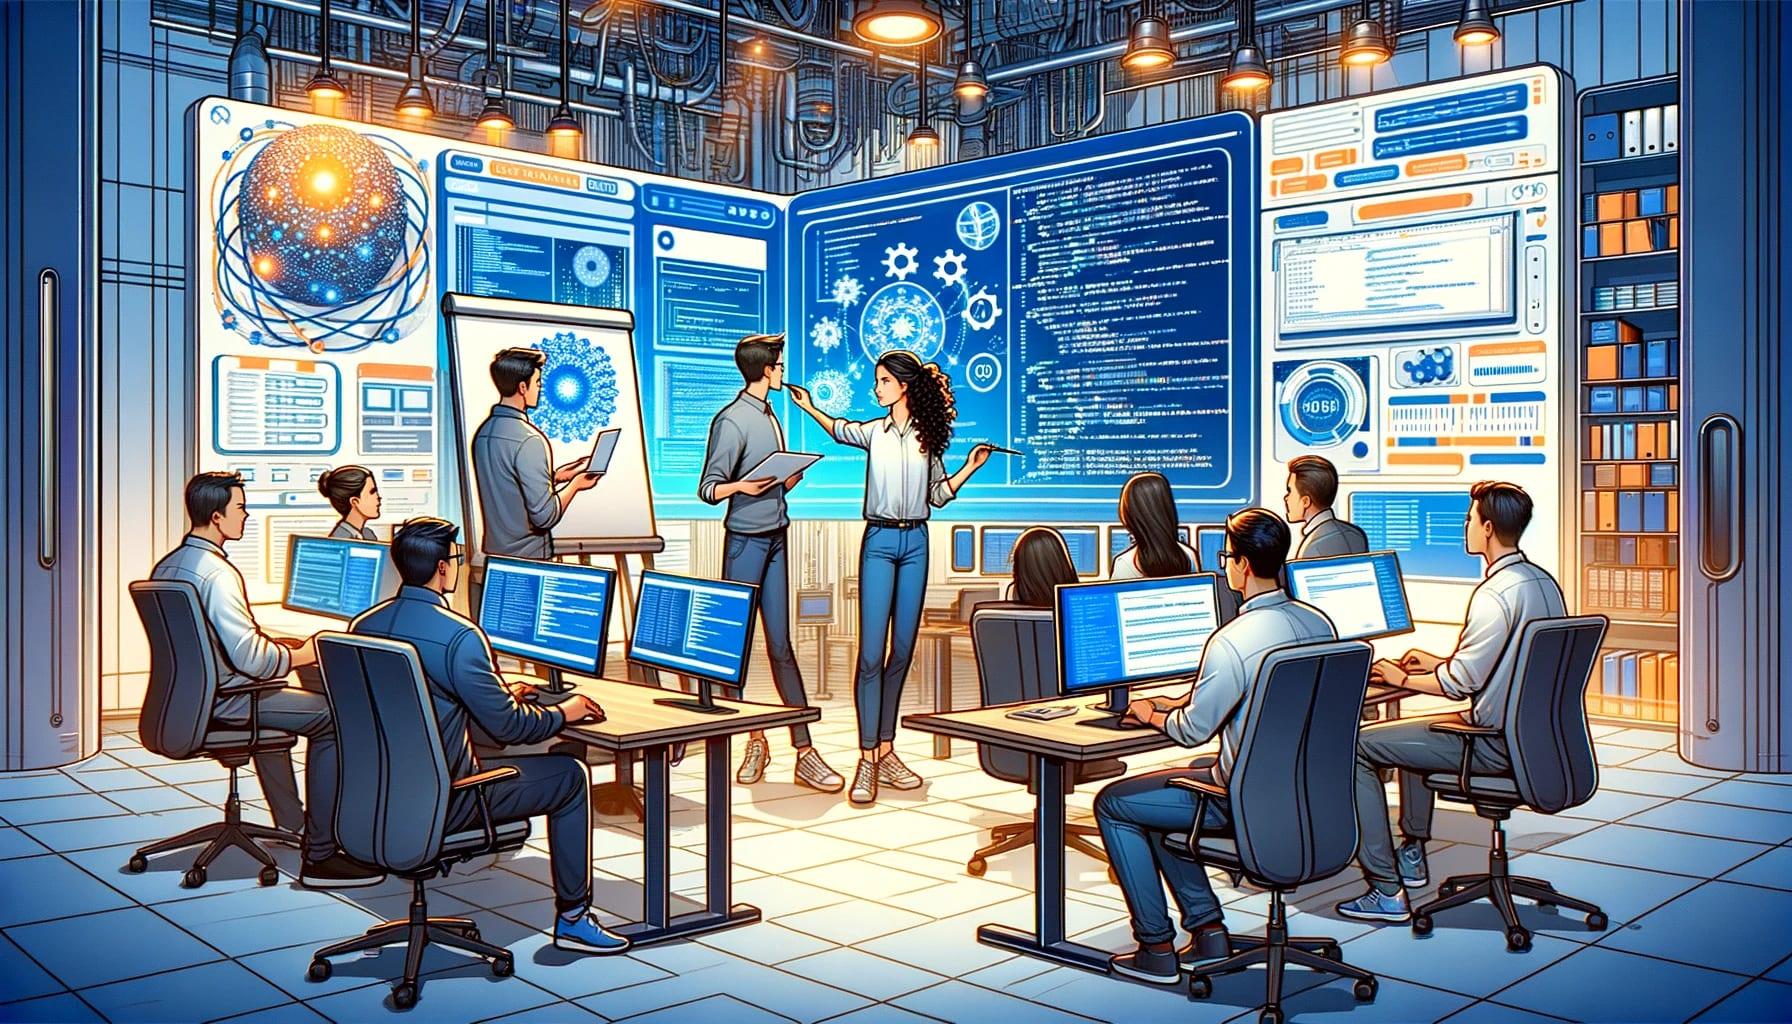 Dynamic tech team collaborates in a server room filled with monitors displaying data analytics and network security information. The image conveys teamwork in IT and cybersecurity, perfect for tech industry content.